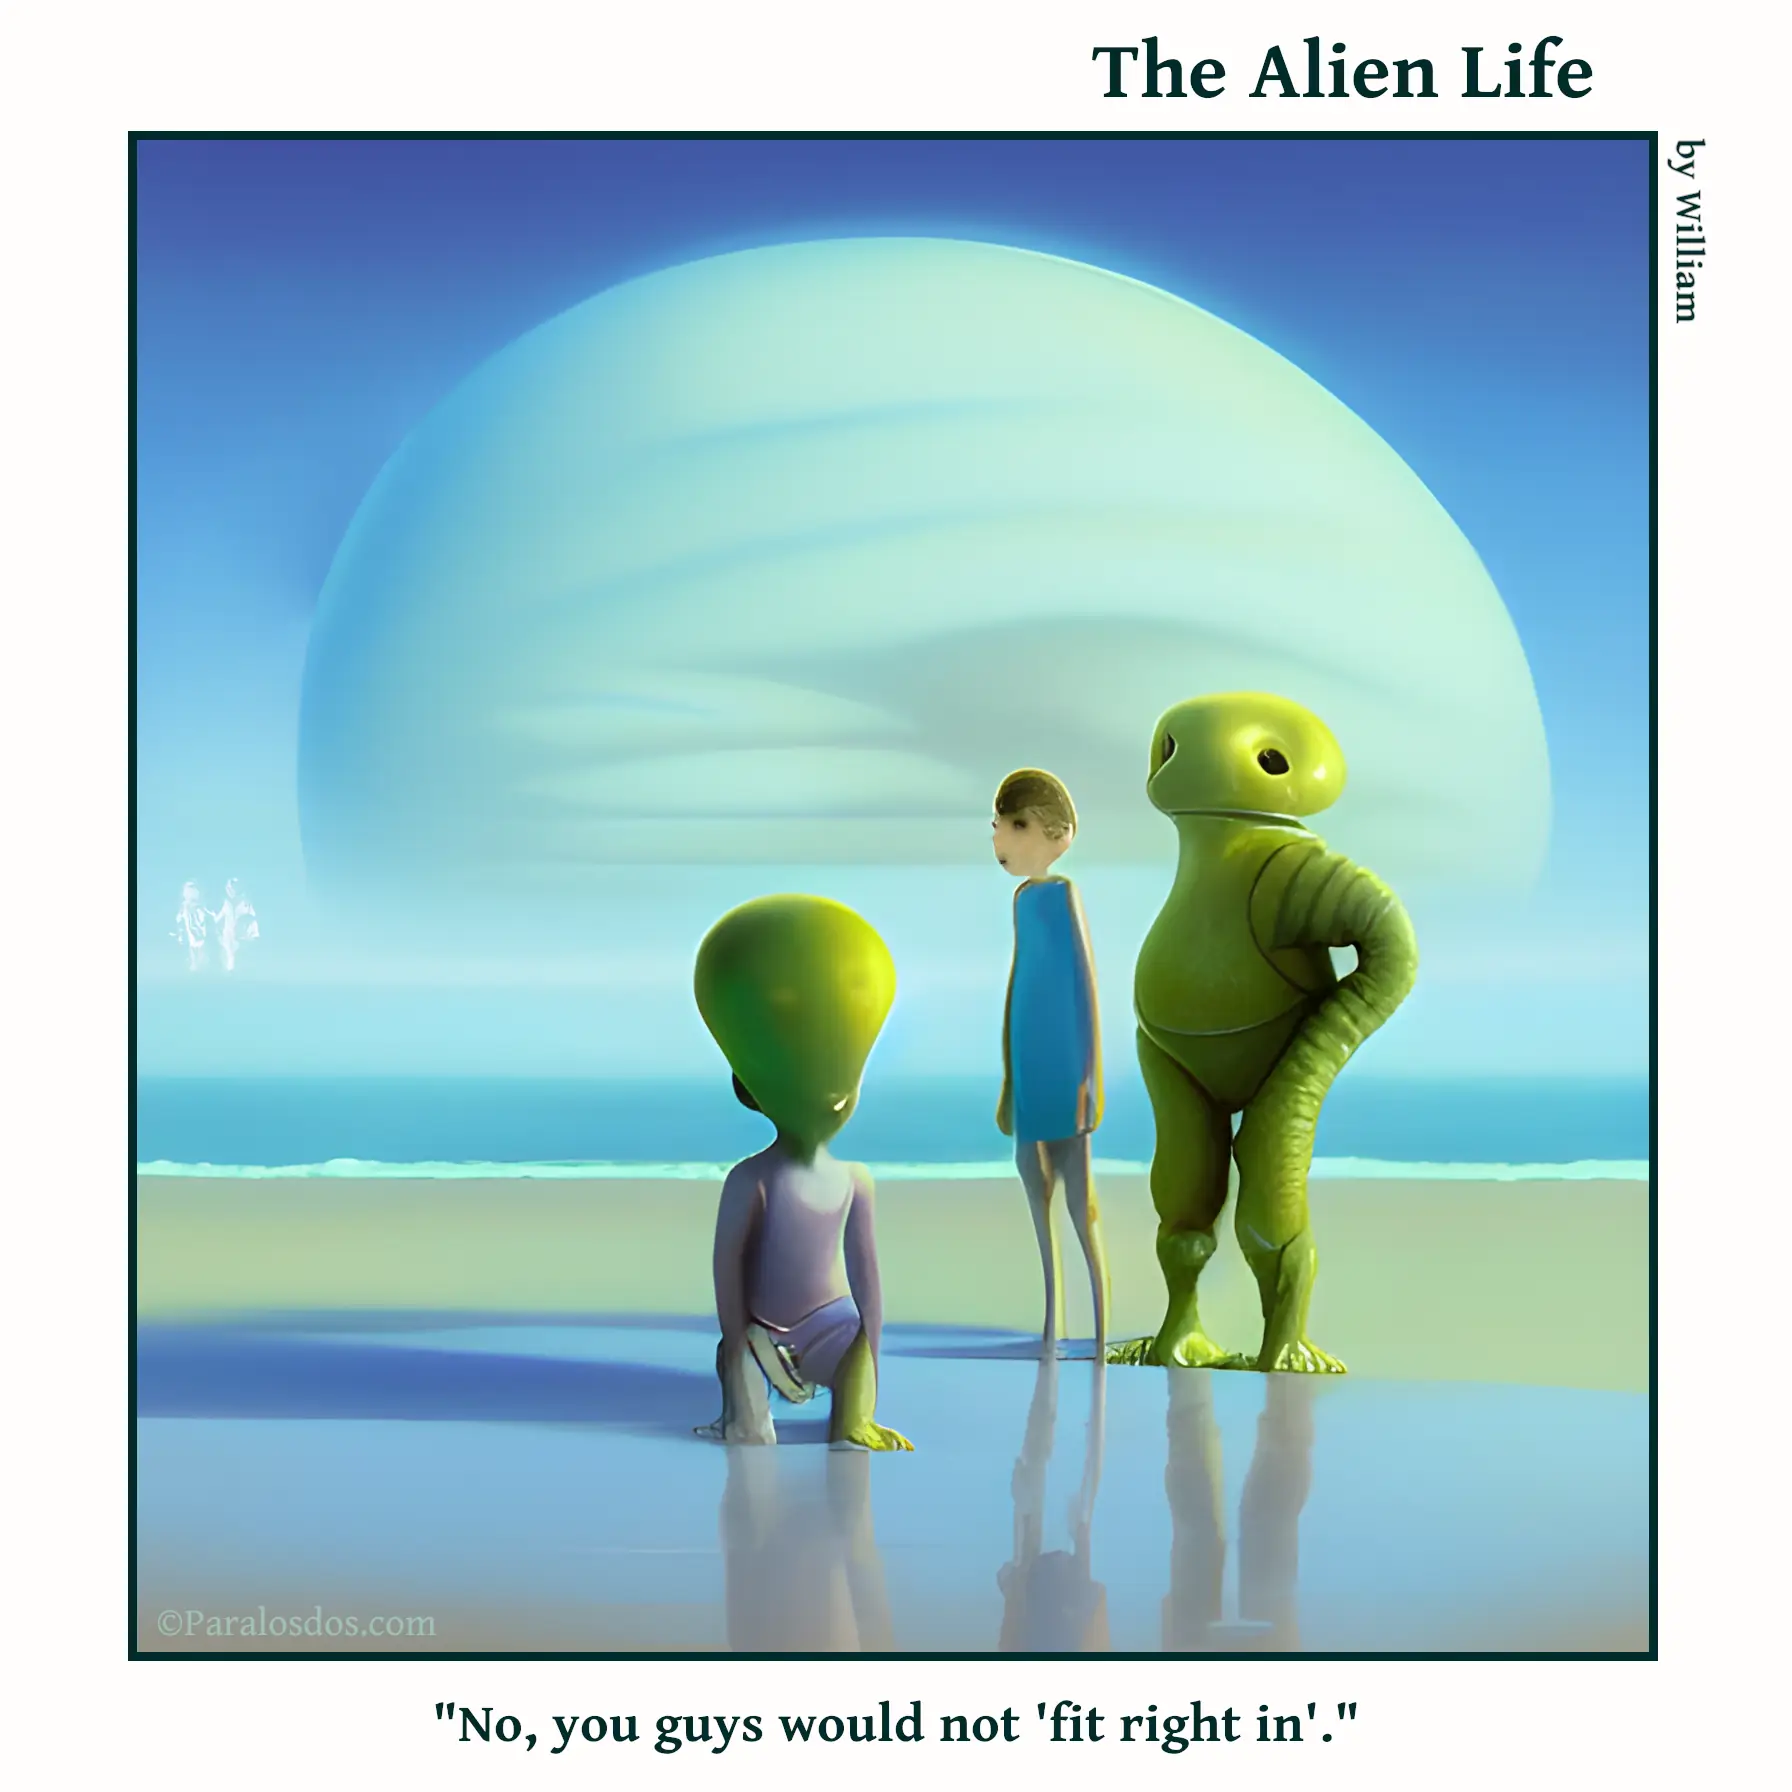 The Alien Life, one panel Comic. Two aliens are standing on a beach with a human between them. There is a giant planet in the background. The caption reads: "No, you guys would not 'fit right in'."